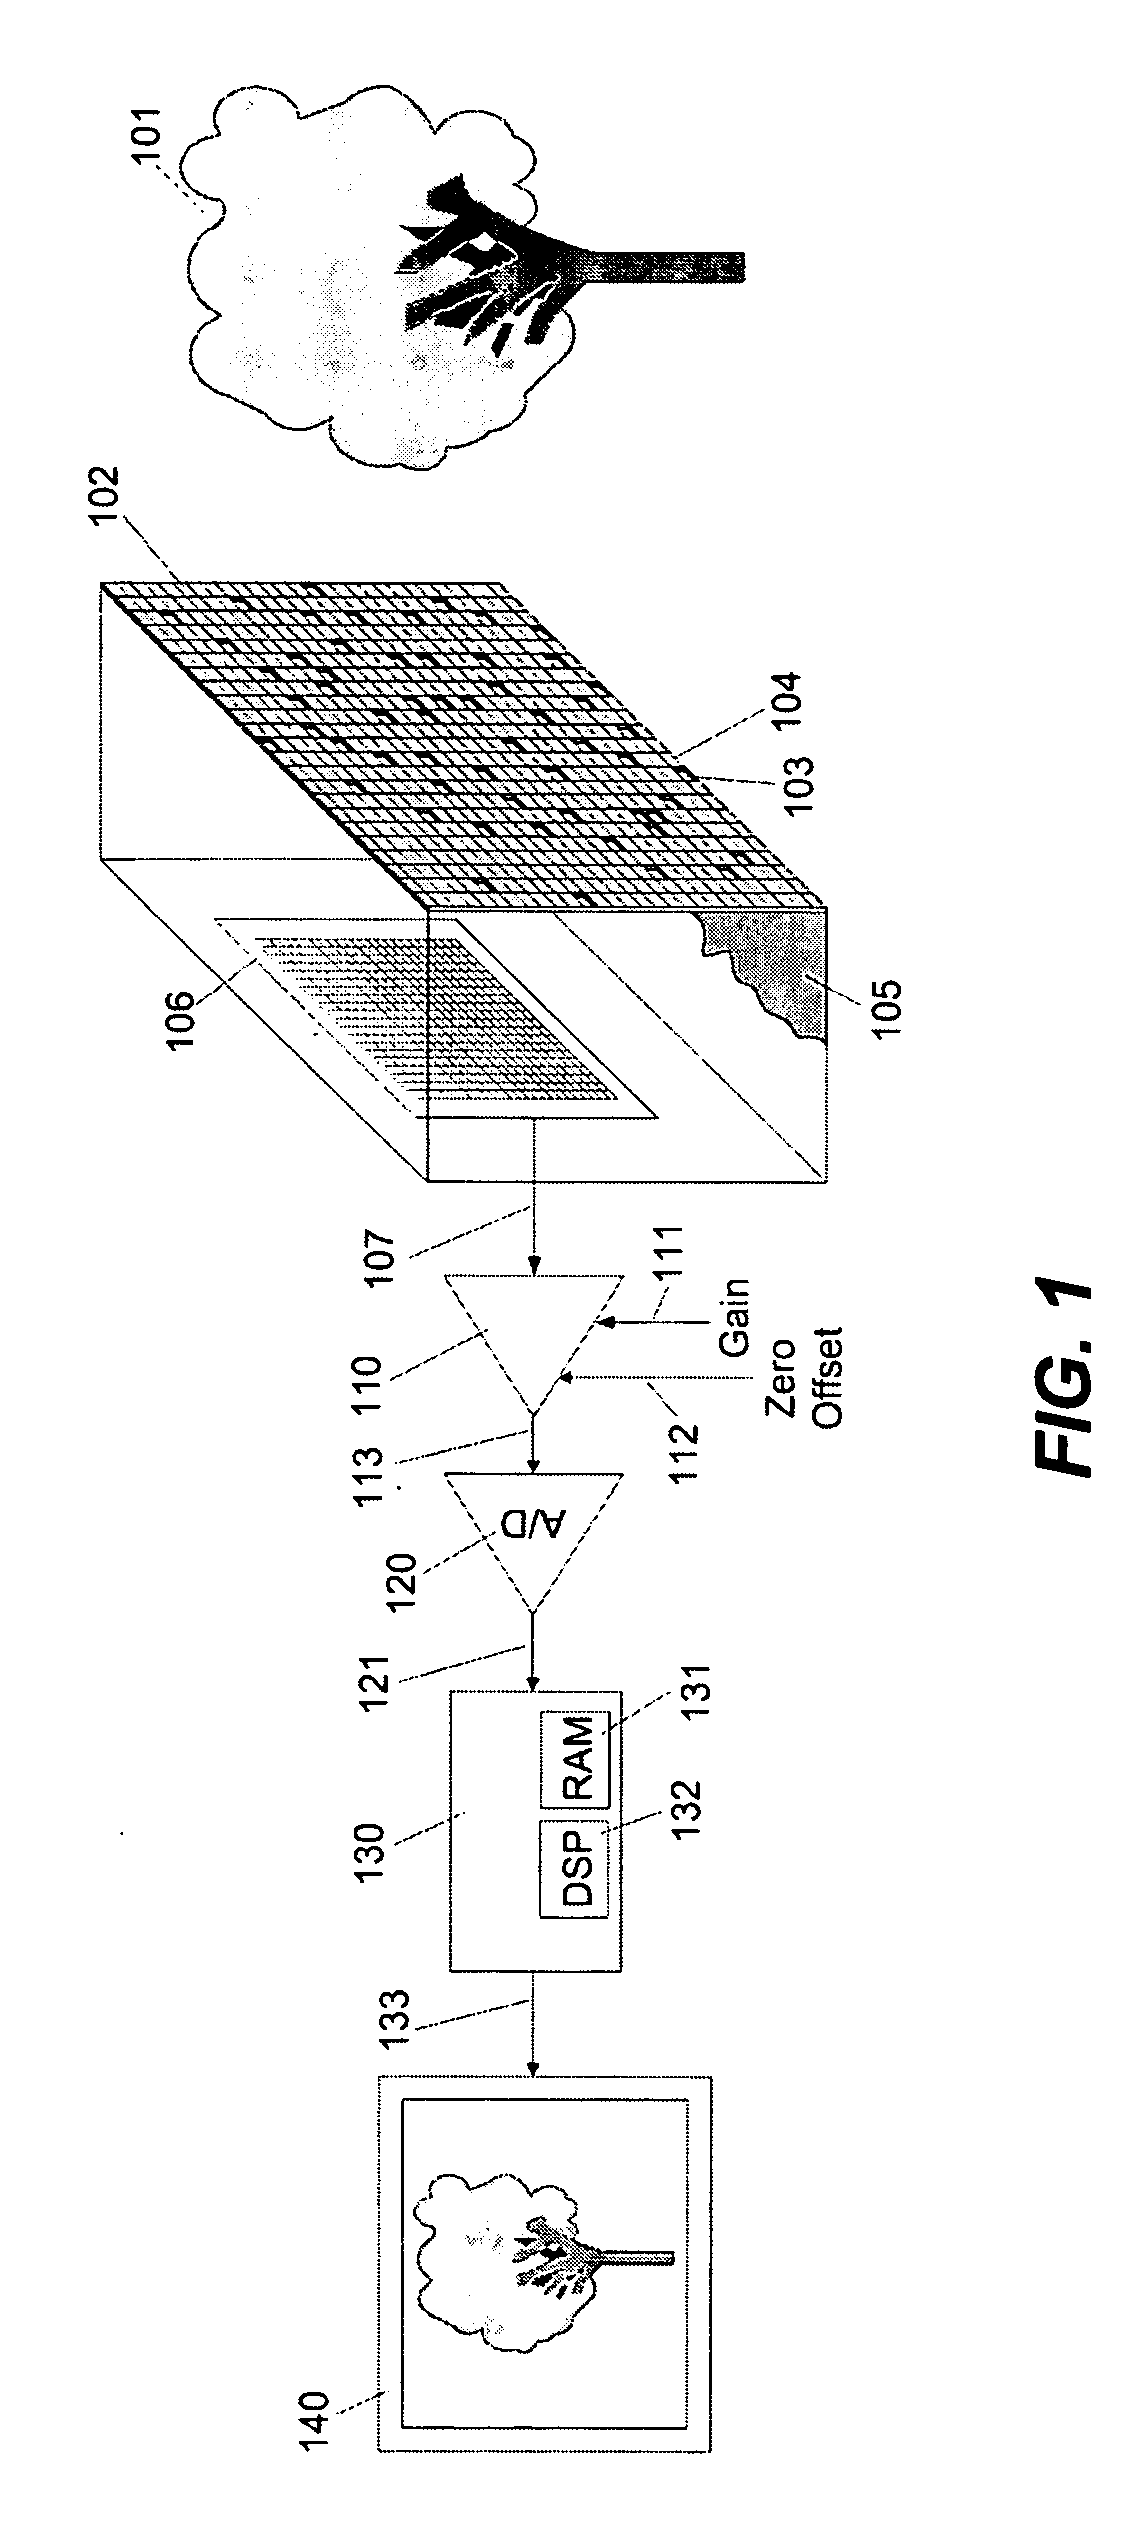 Apparatus and method for capturing still images and video using coded aperture techniques